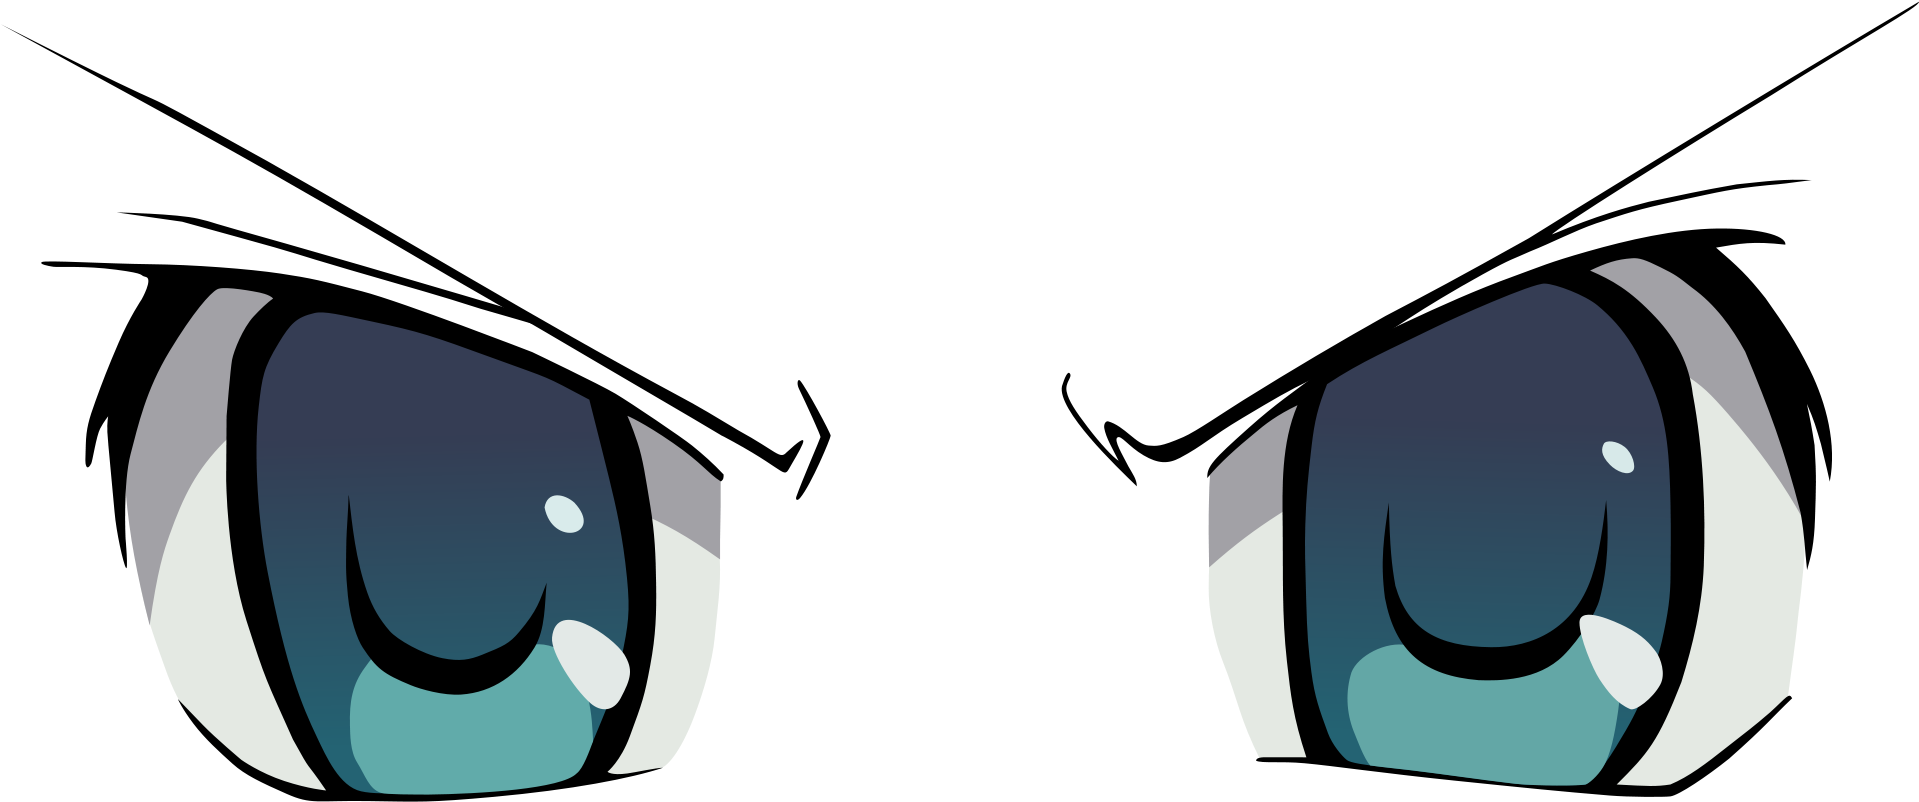 Download Eyes Anime Free HD Image HQ PNG Image in different resolution |  FreePNGImg